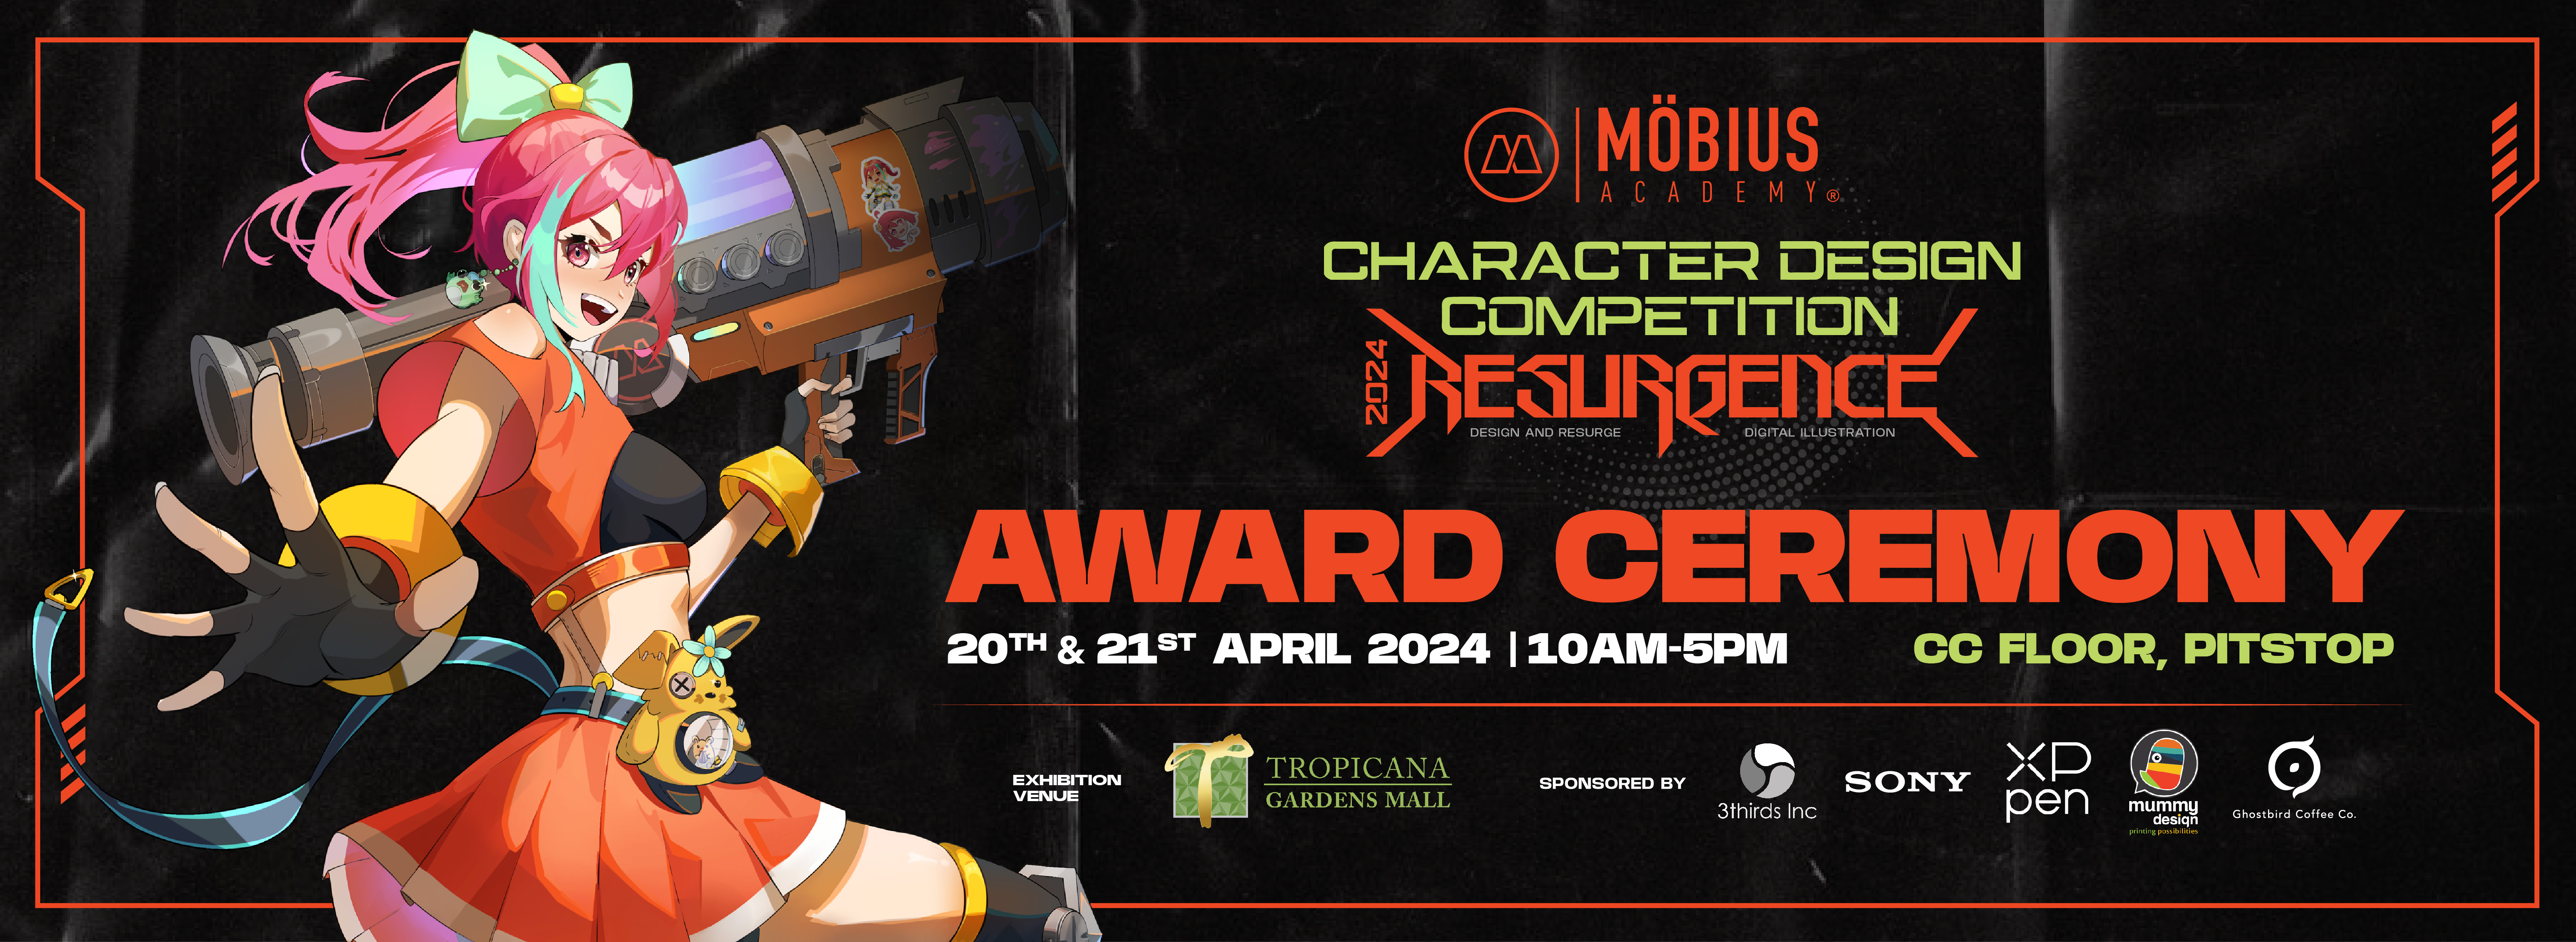 Tropicana Gardens Mall 燃 Resurgence Character Design Competition Award Ceremony